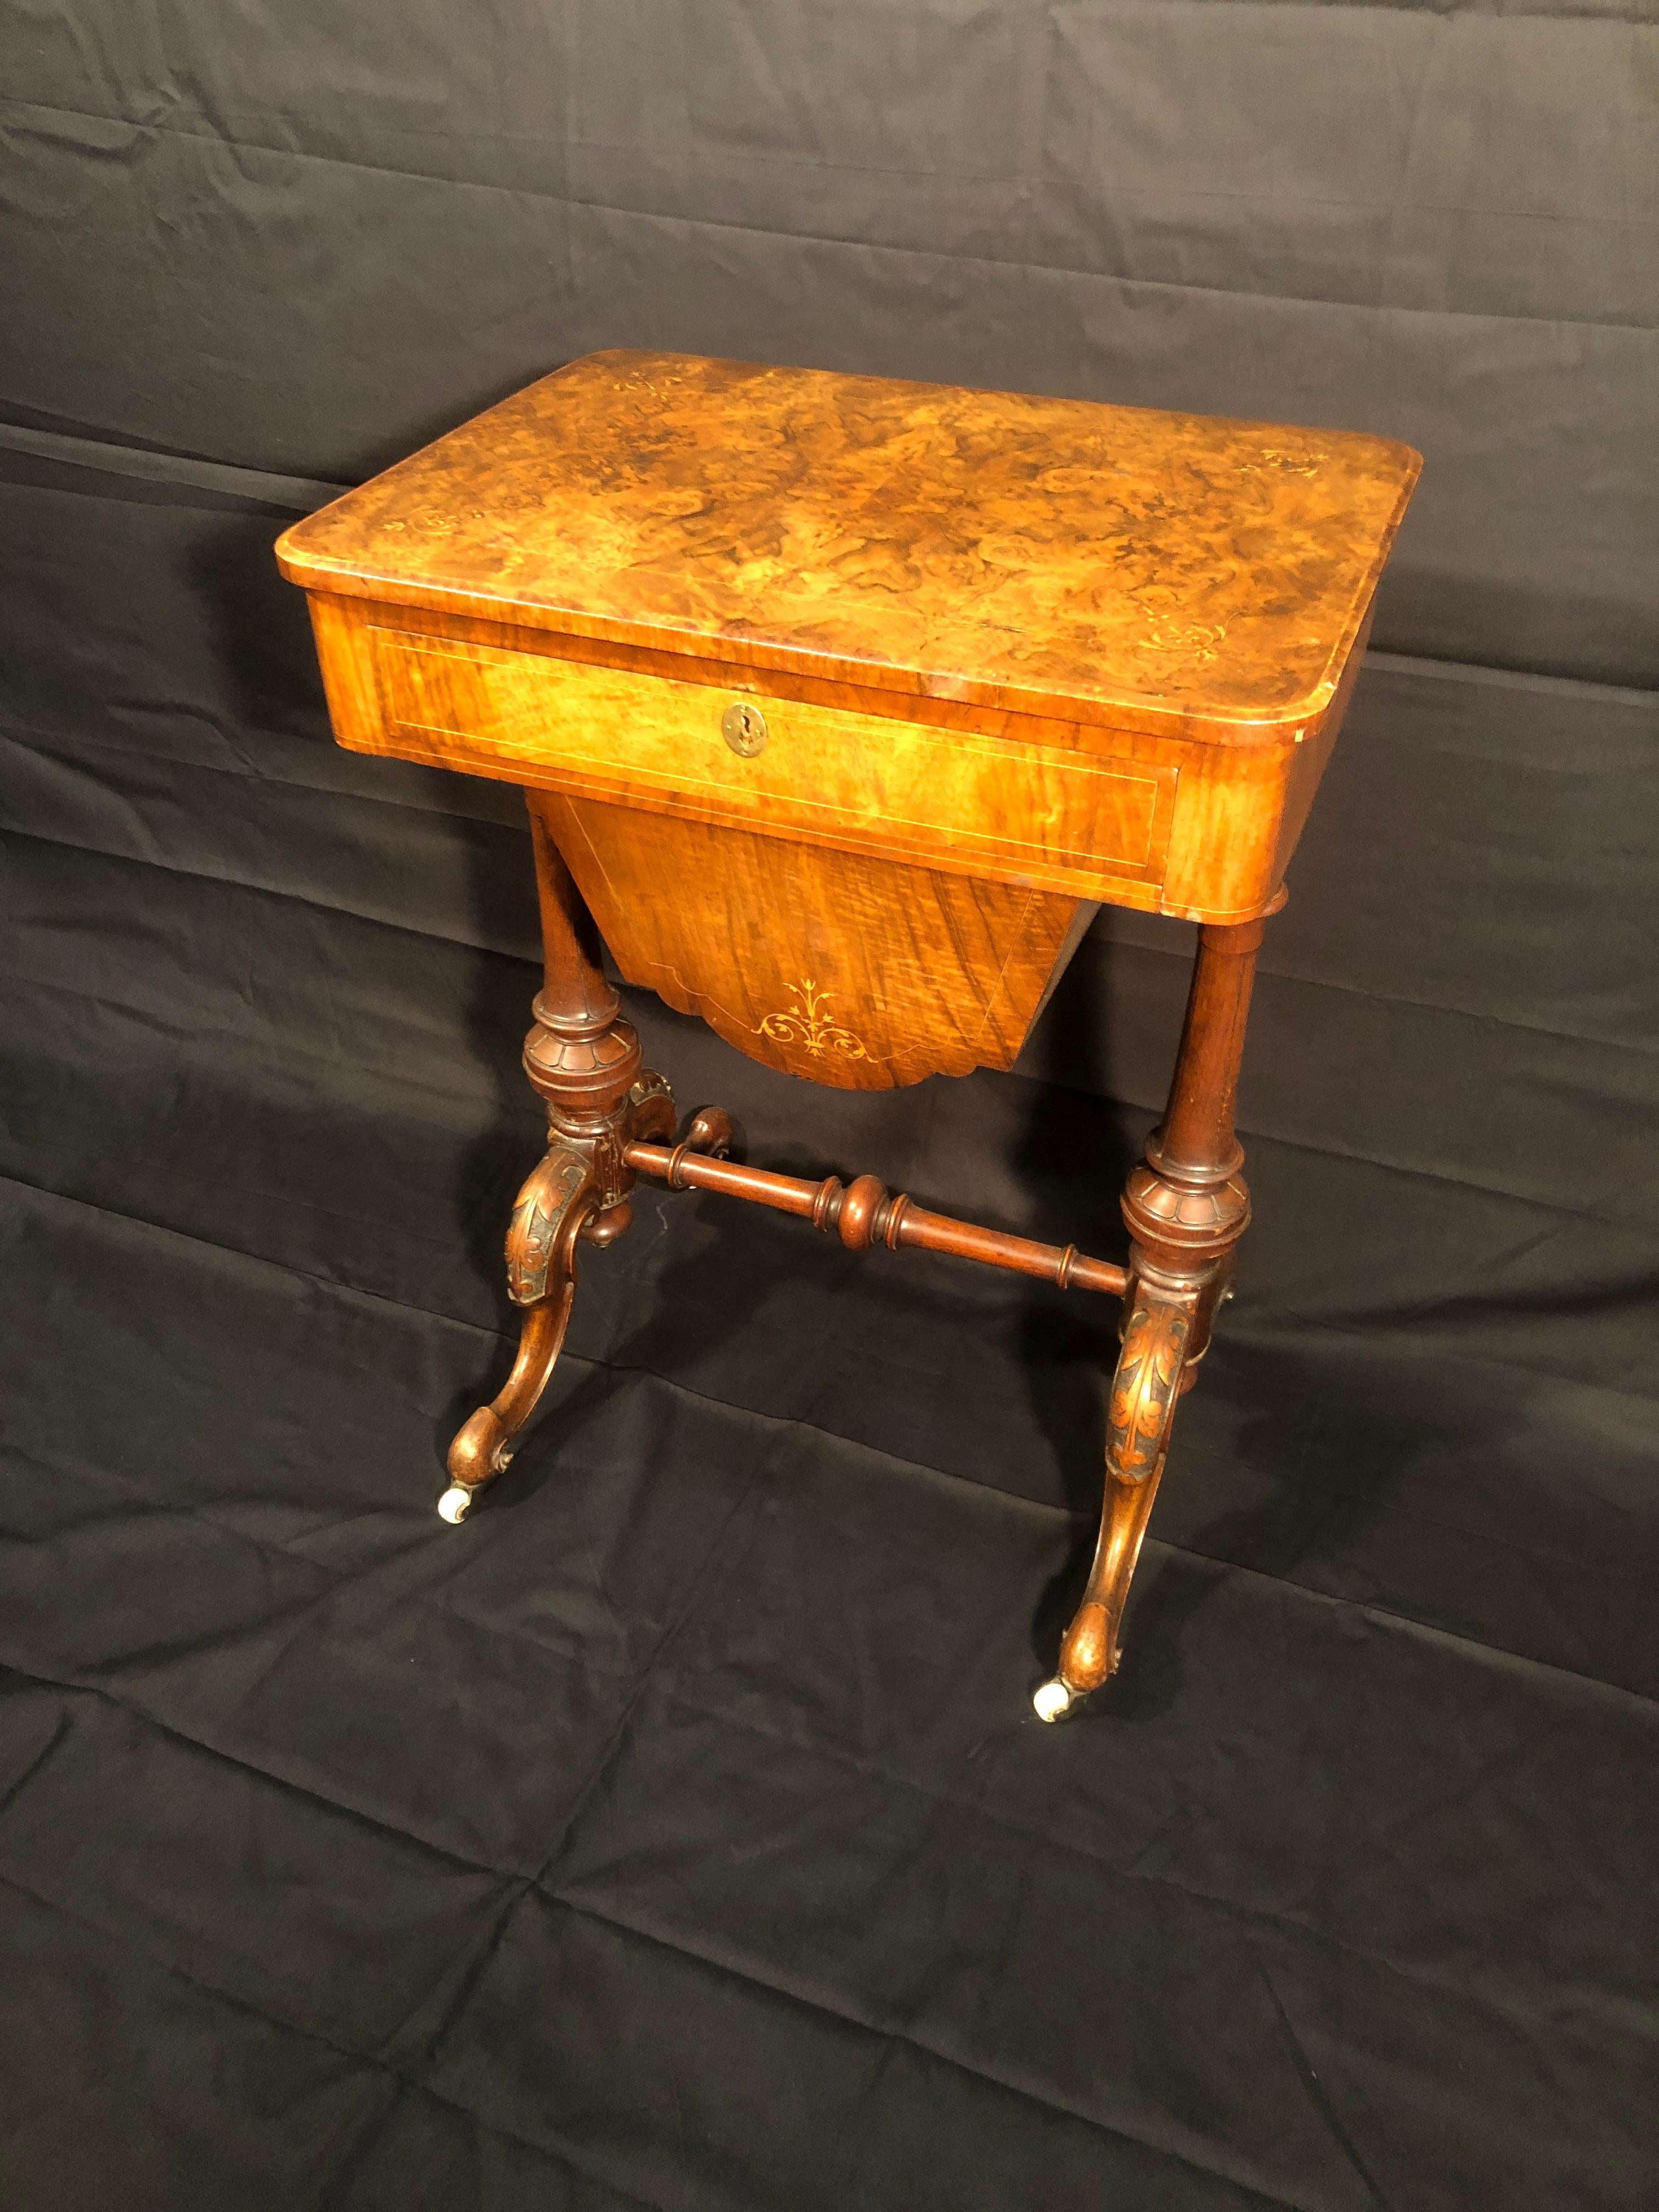 English work table, Victorian period, circa 1870, with drawer and drawer for knitting thread, centre piece in walnut briar wood, finely inlaid with floral motifs in boxwood, the game of briar on the top is exceptional. In good structural conditions,